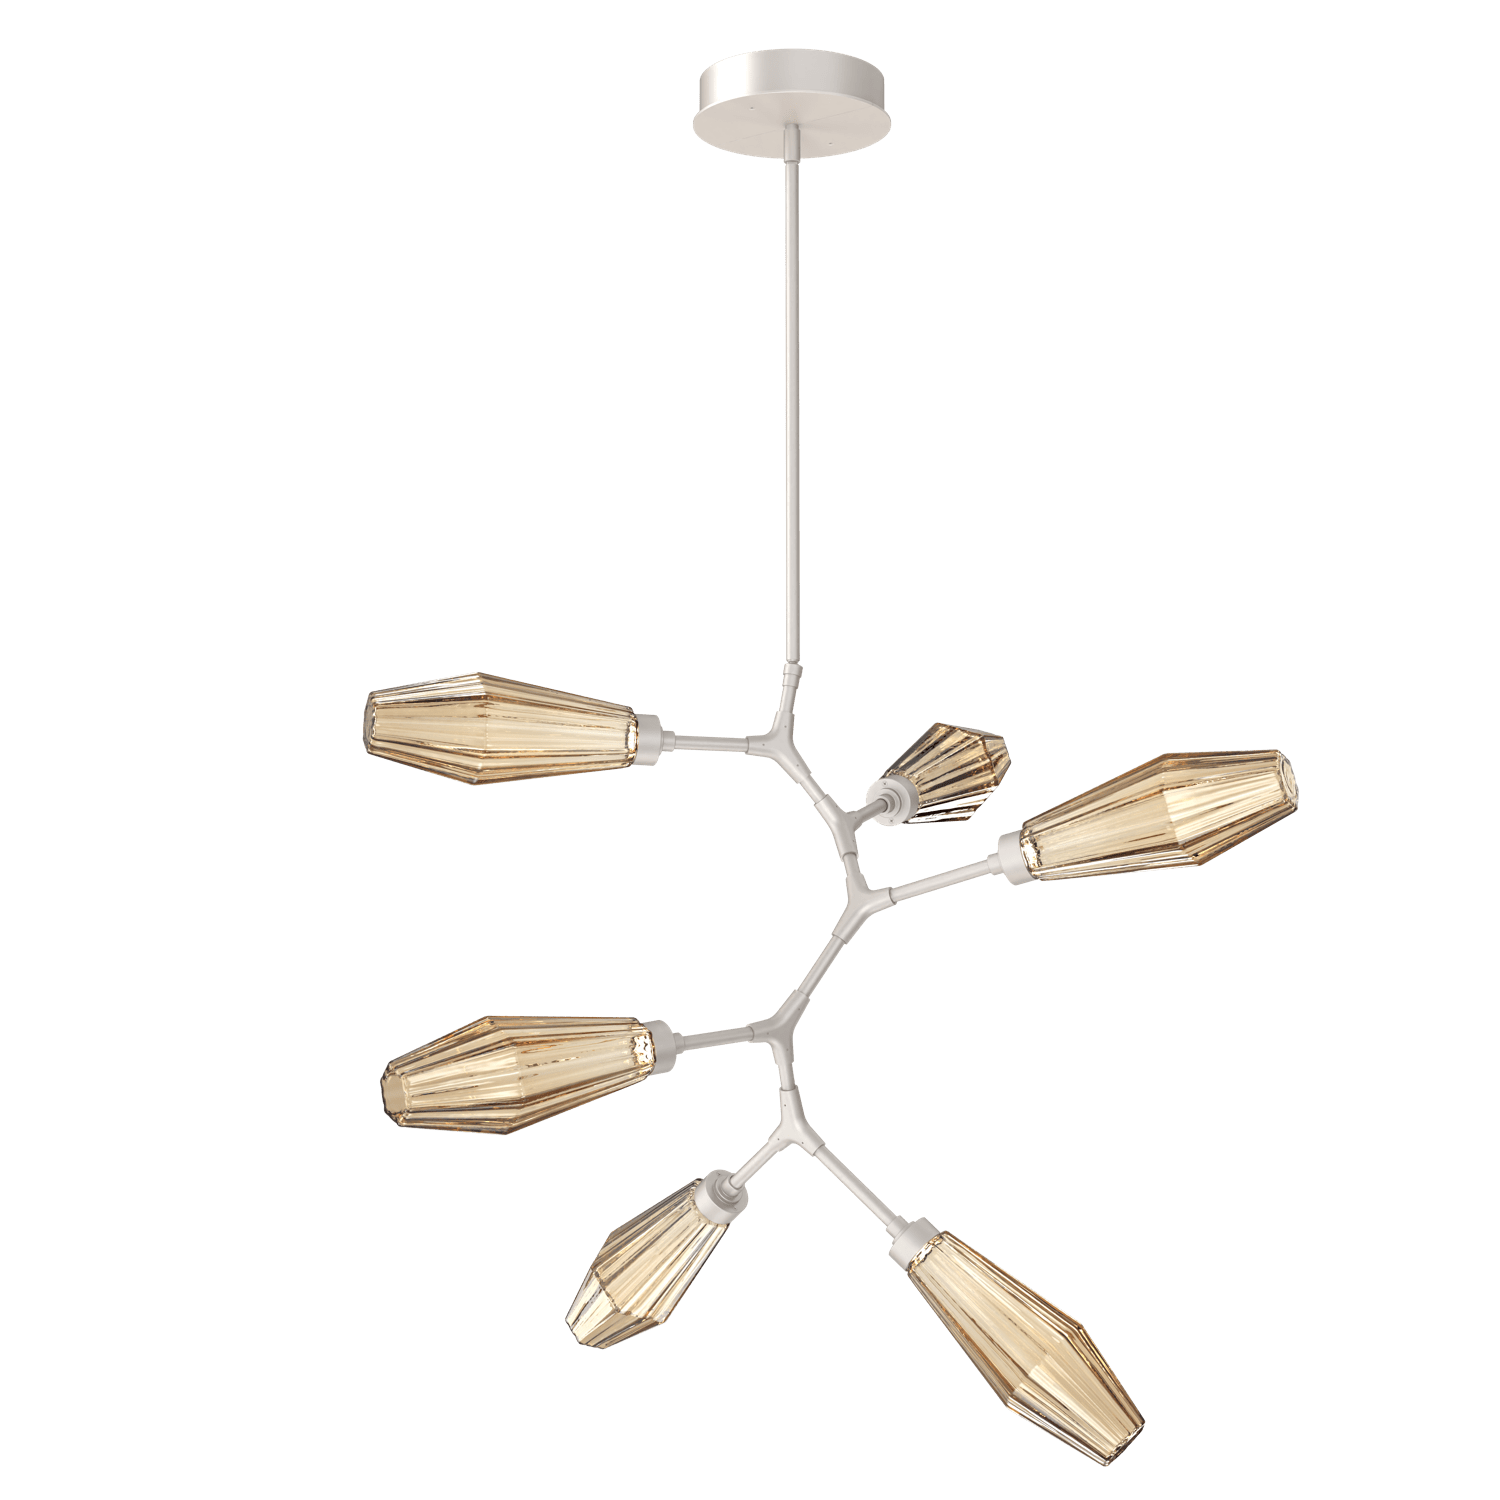 CHB0049-VA-BS-RB-Hammerton-Studio-Aalto-6-light-modern-vine-chandelier-with-metallic-beige-silver-finish-and-optic-ribbed-bronze-glass-shades-and-LED-lamping